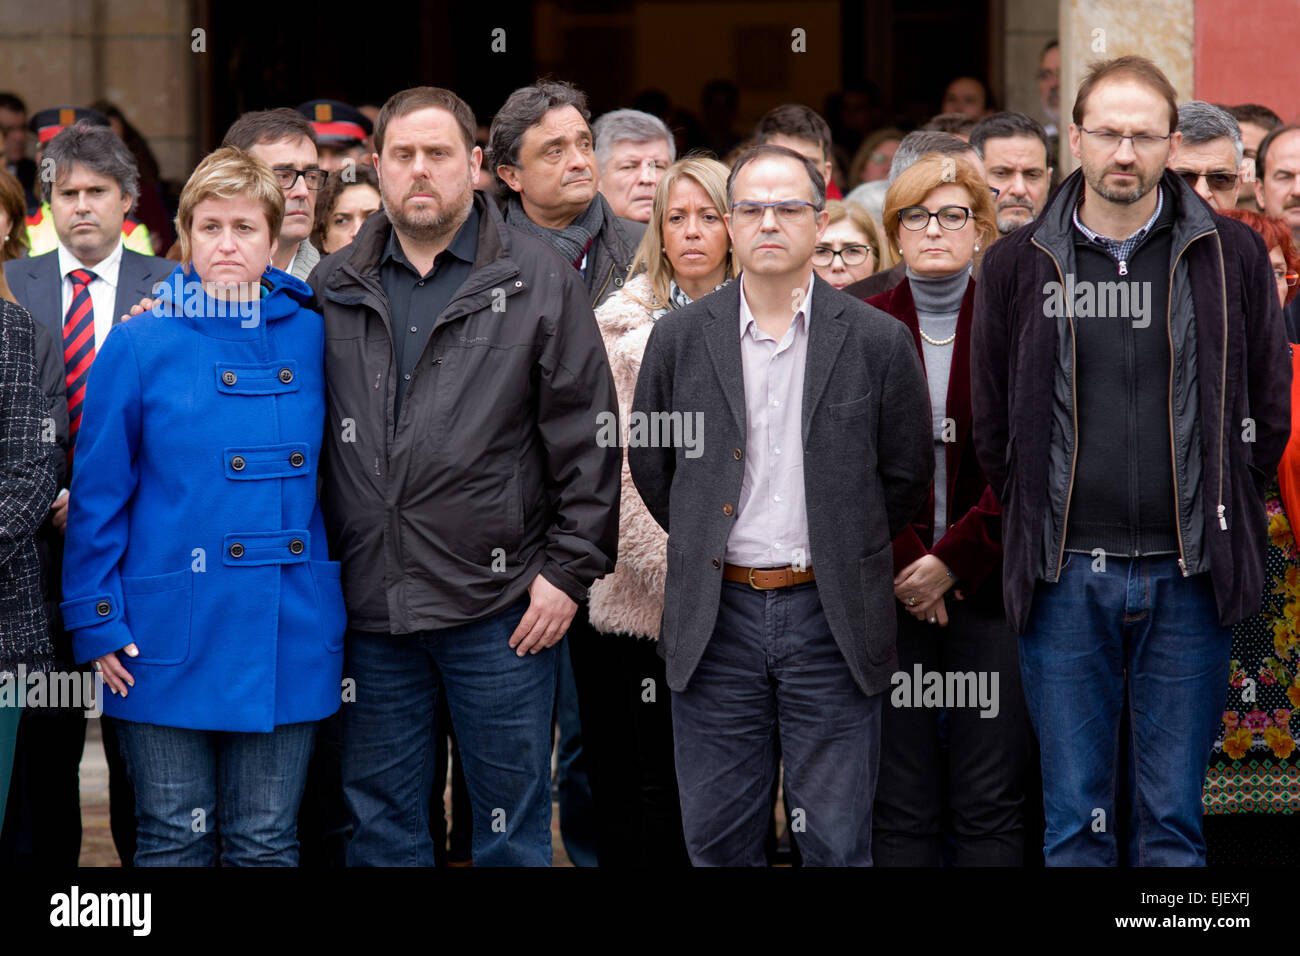 Barcelona, Spain. 25th Mar, 2015. Catalan parliamentarians during a moment of silence in front of the Catalan Parliament in mourning for the victims of the plane crash in the French Alps. On the left side Anna SimÃ³ and Oriol Junqueras, of ERC party, visibly affected because of the wife of the head of cabinet of ERC party was on the plane. Credit:  ZUMA Press, Inc./Alamy Live News Stock Photo